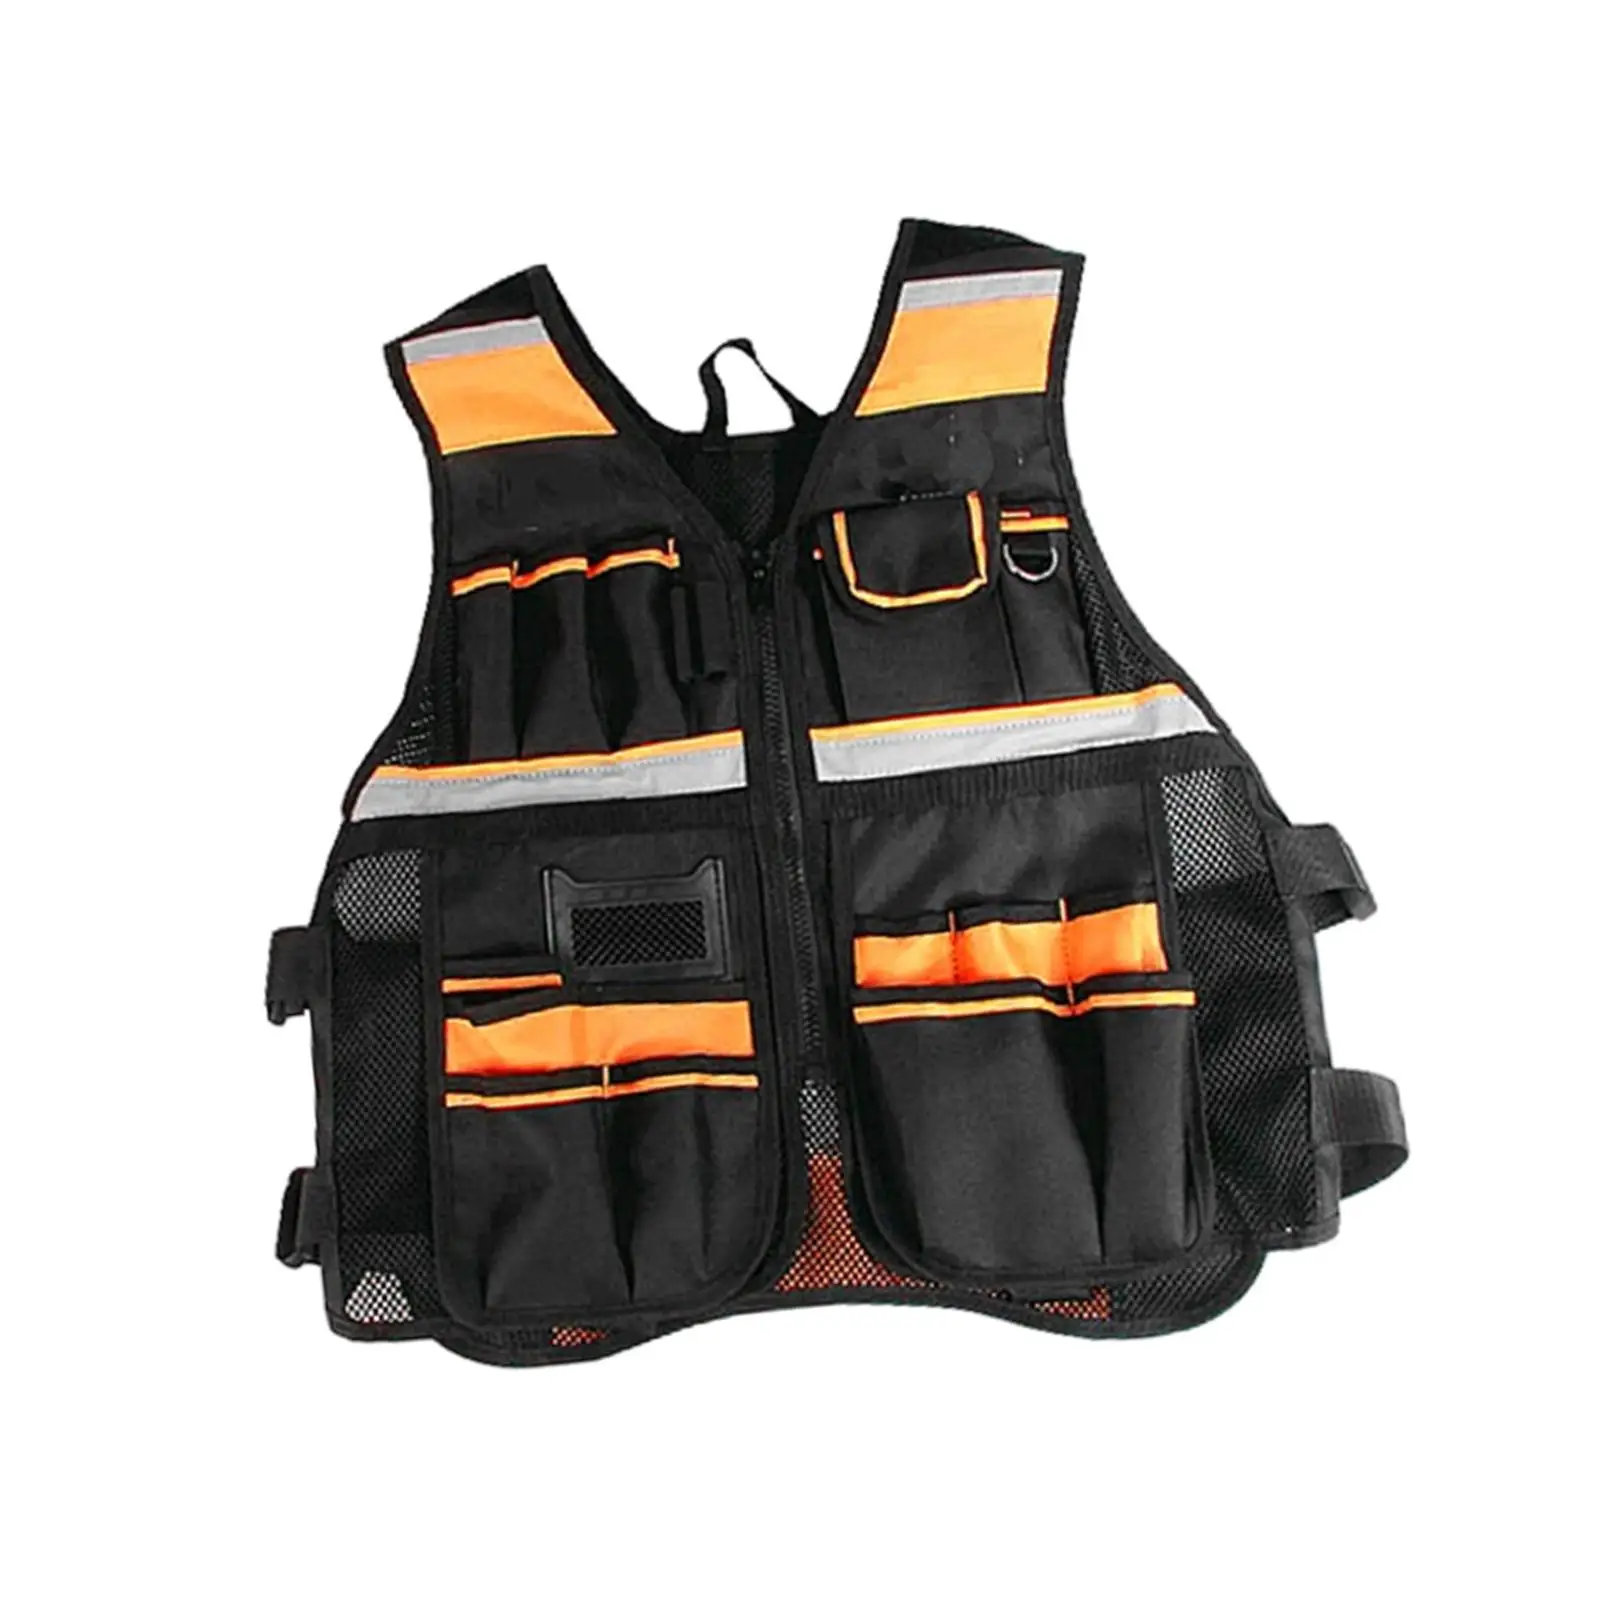 Tool Vest Electrician Carpenters Reflective Mesh Adults Convenient Access Multi Pockets for Industrial Construction Outdoor Work